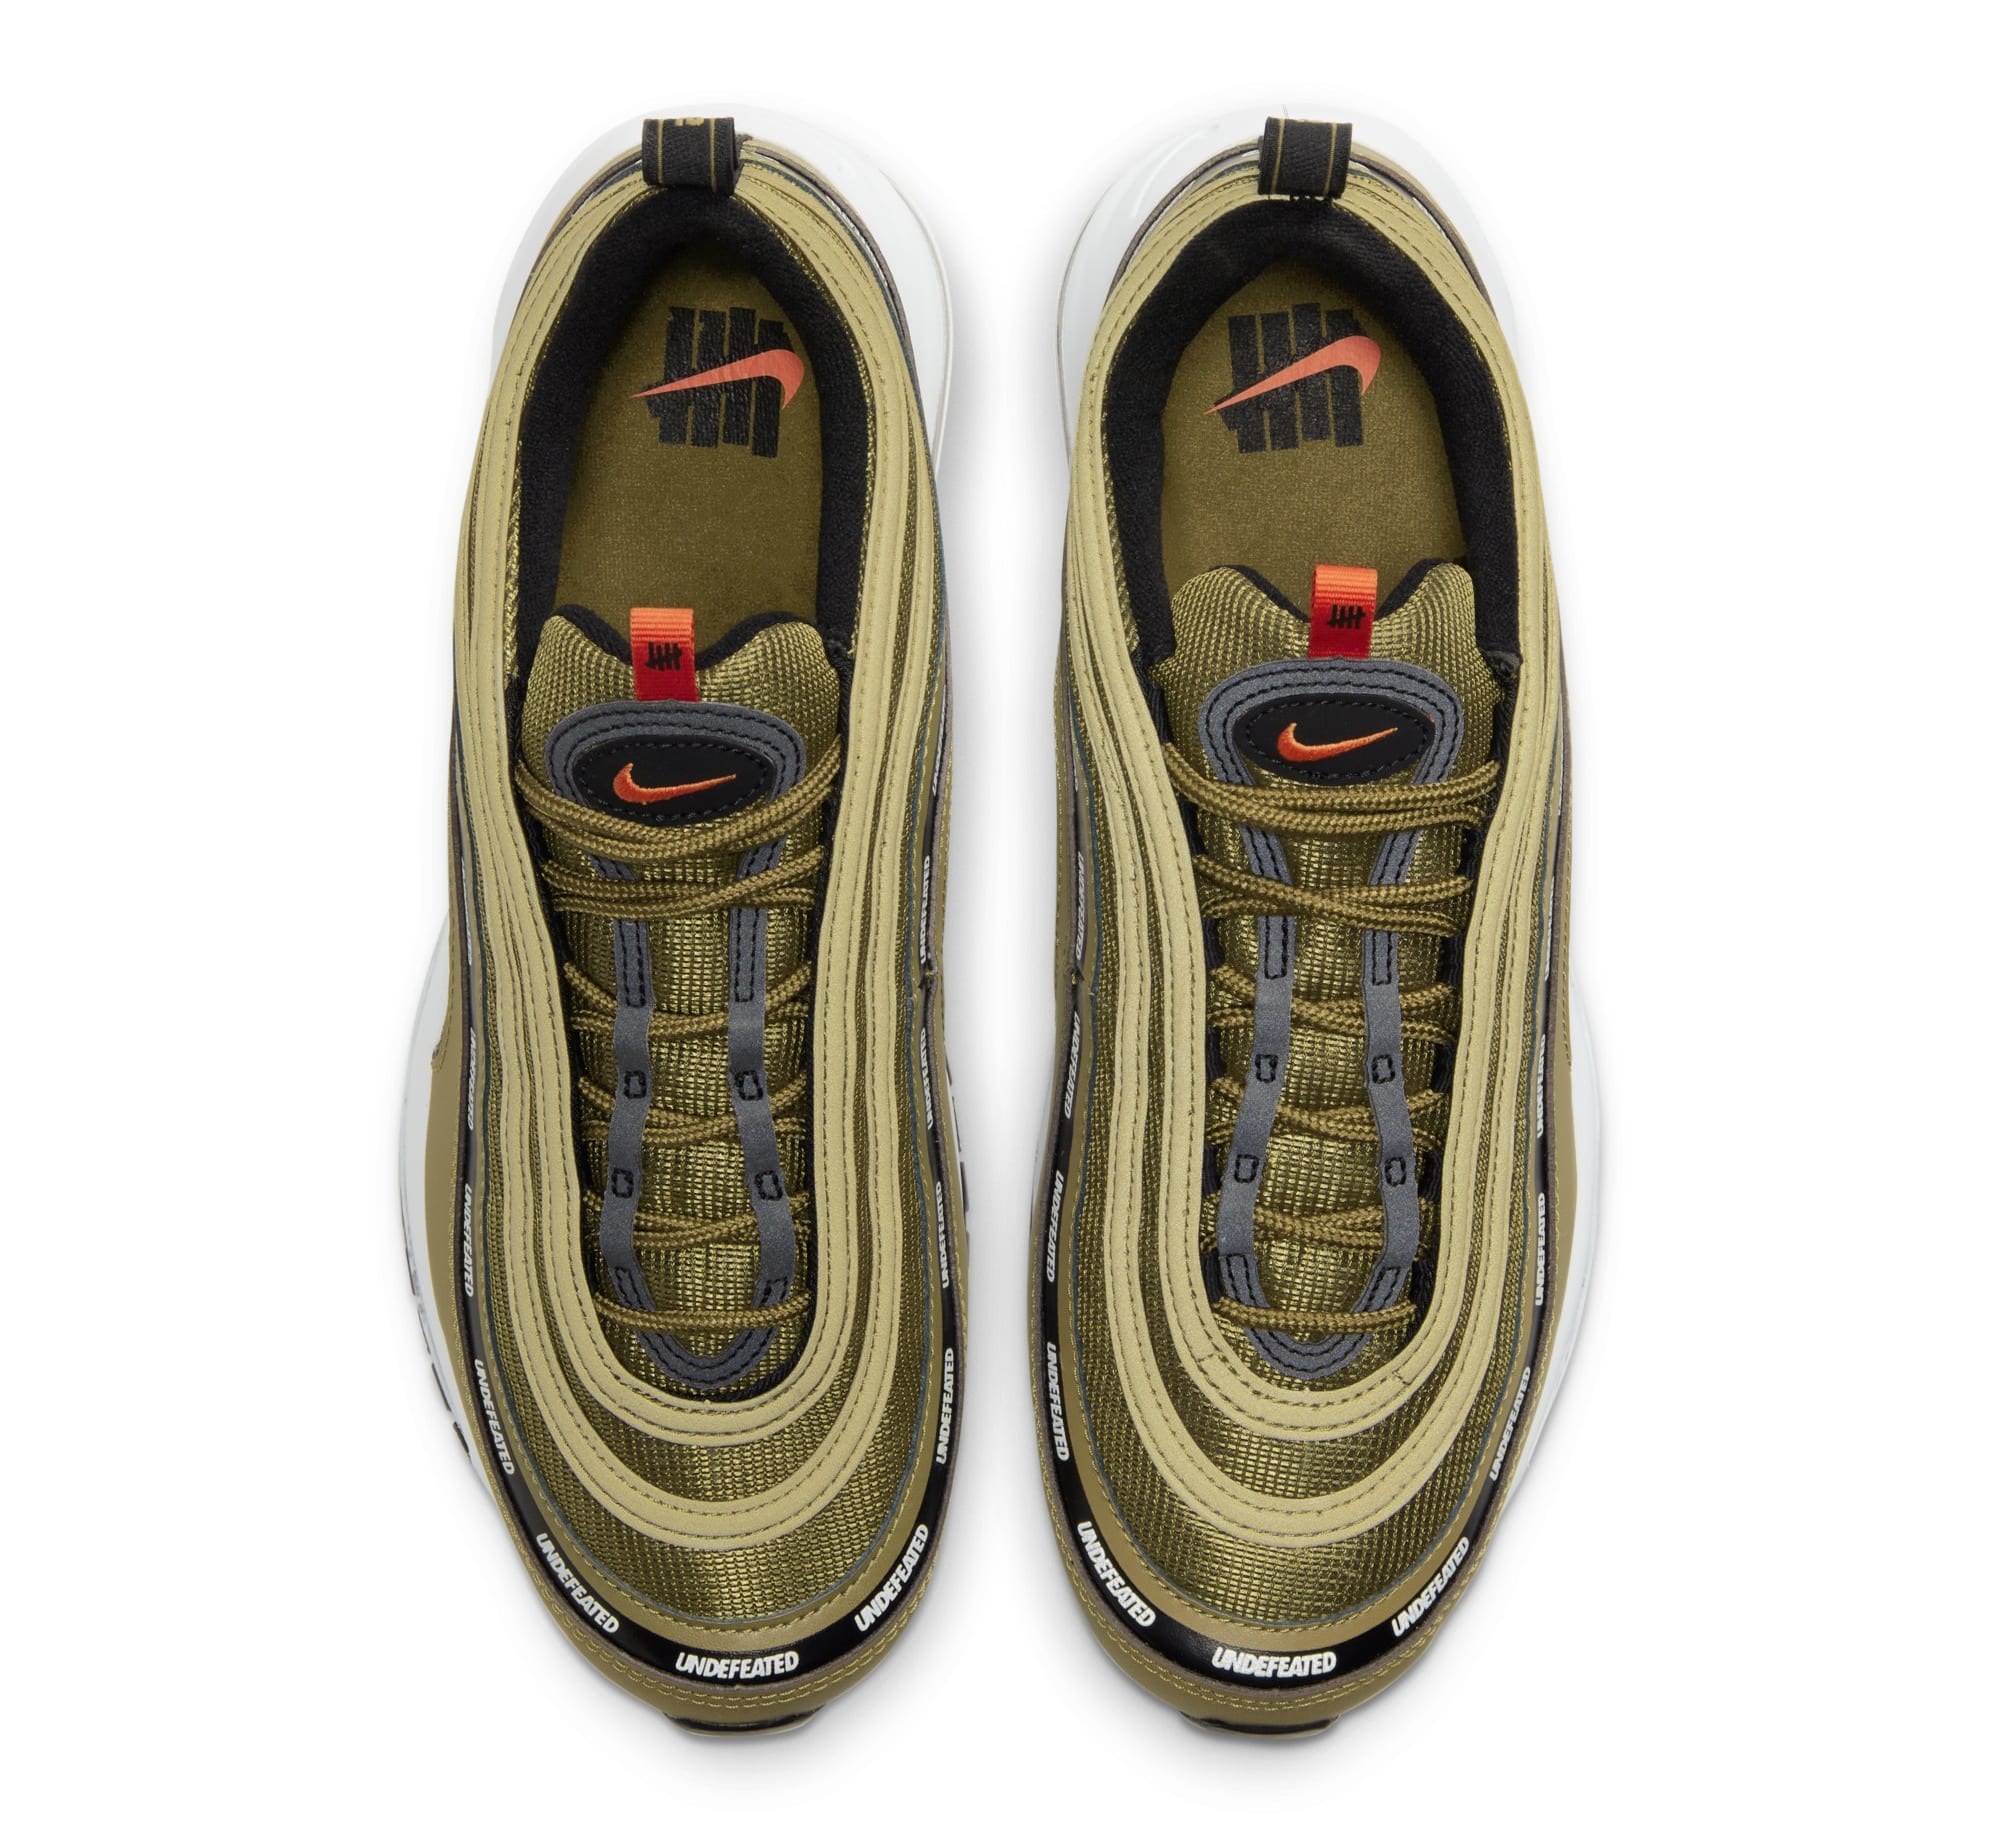 Signs Point to Imminent Undefeated x Nike Air Max 97 Release